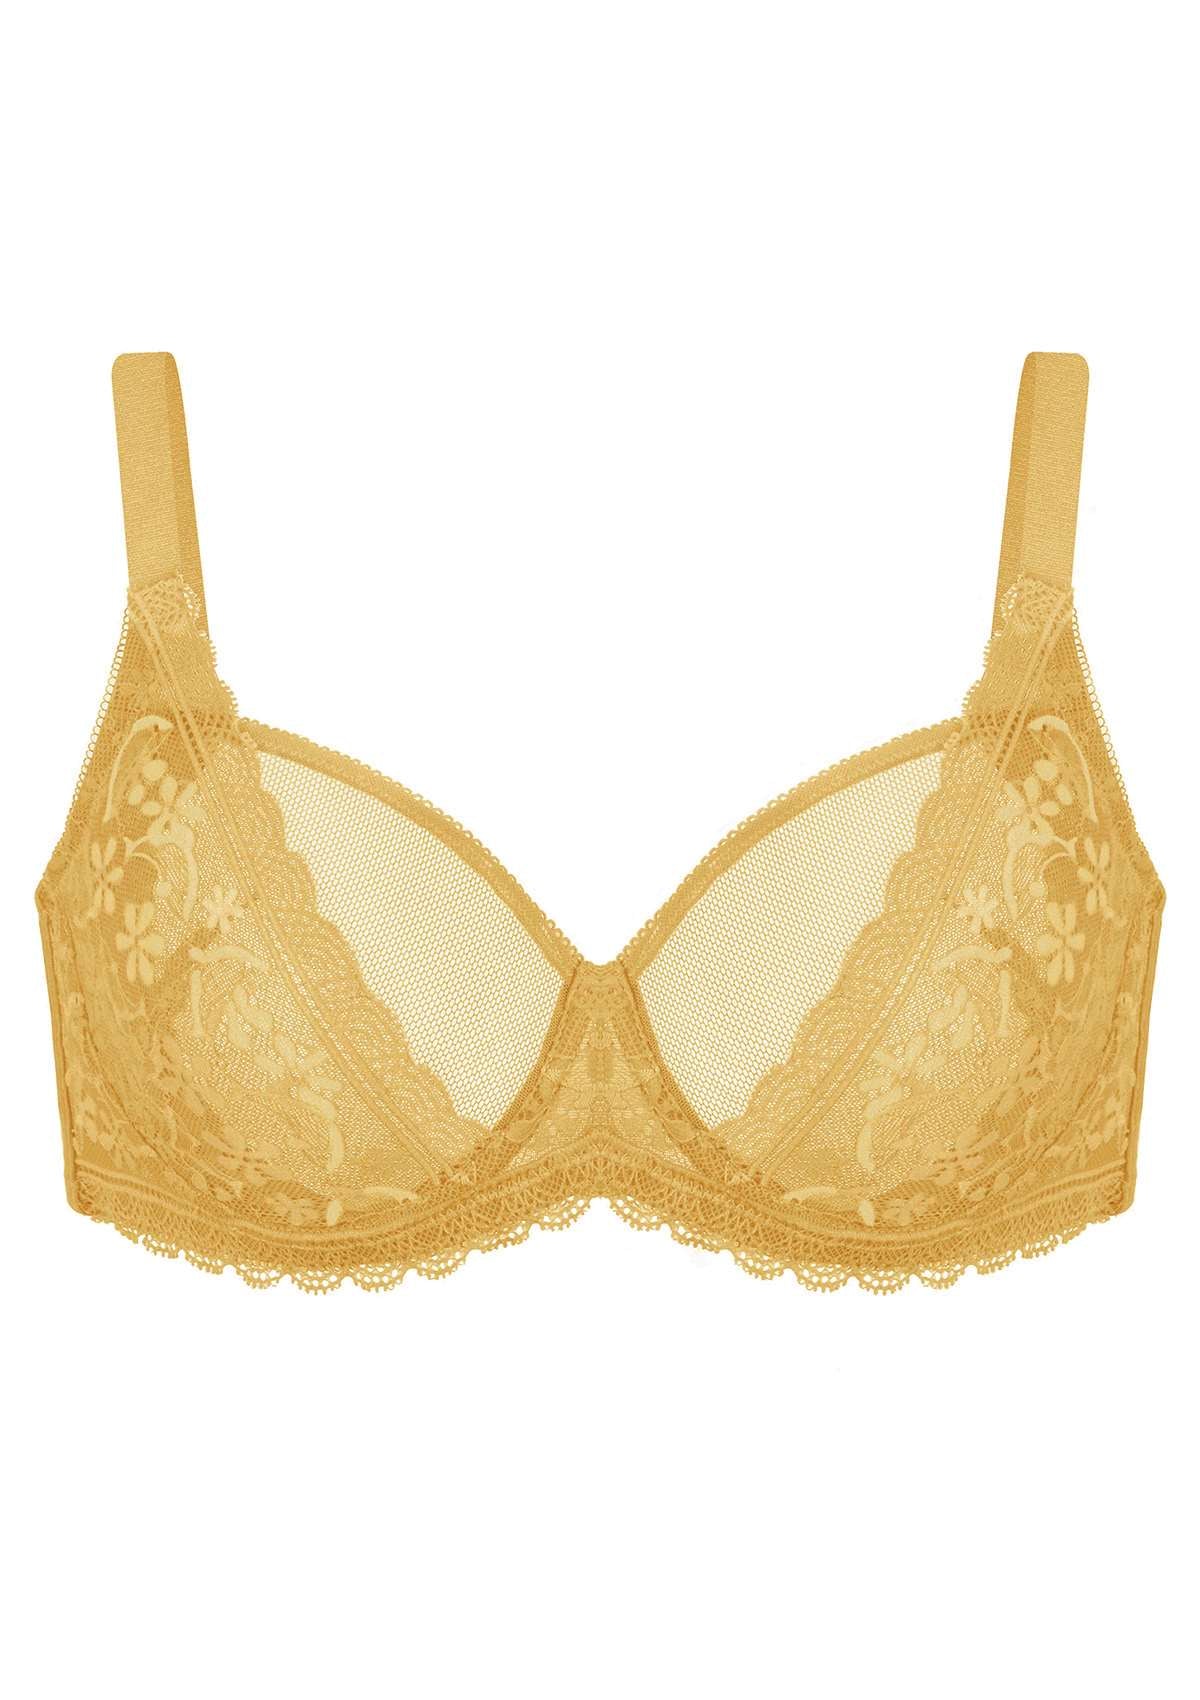 HSIA Anemone Lace Unlined Bra: Supportive, Lightweight Bra - Ginger / 40 / DD/E